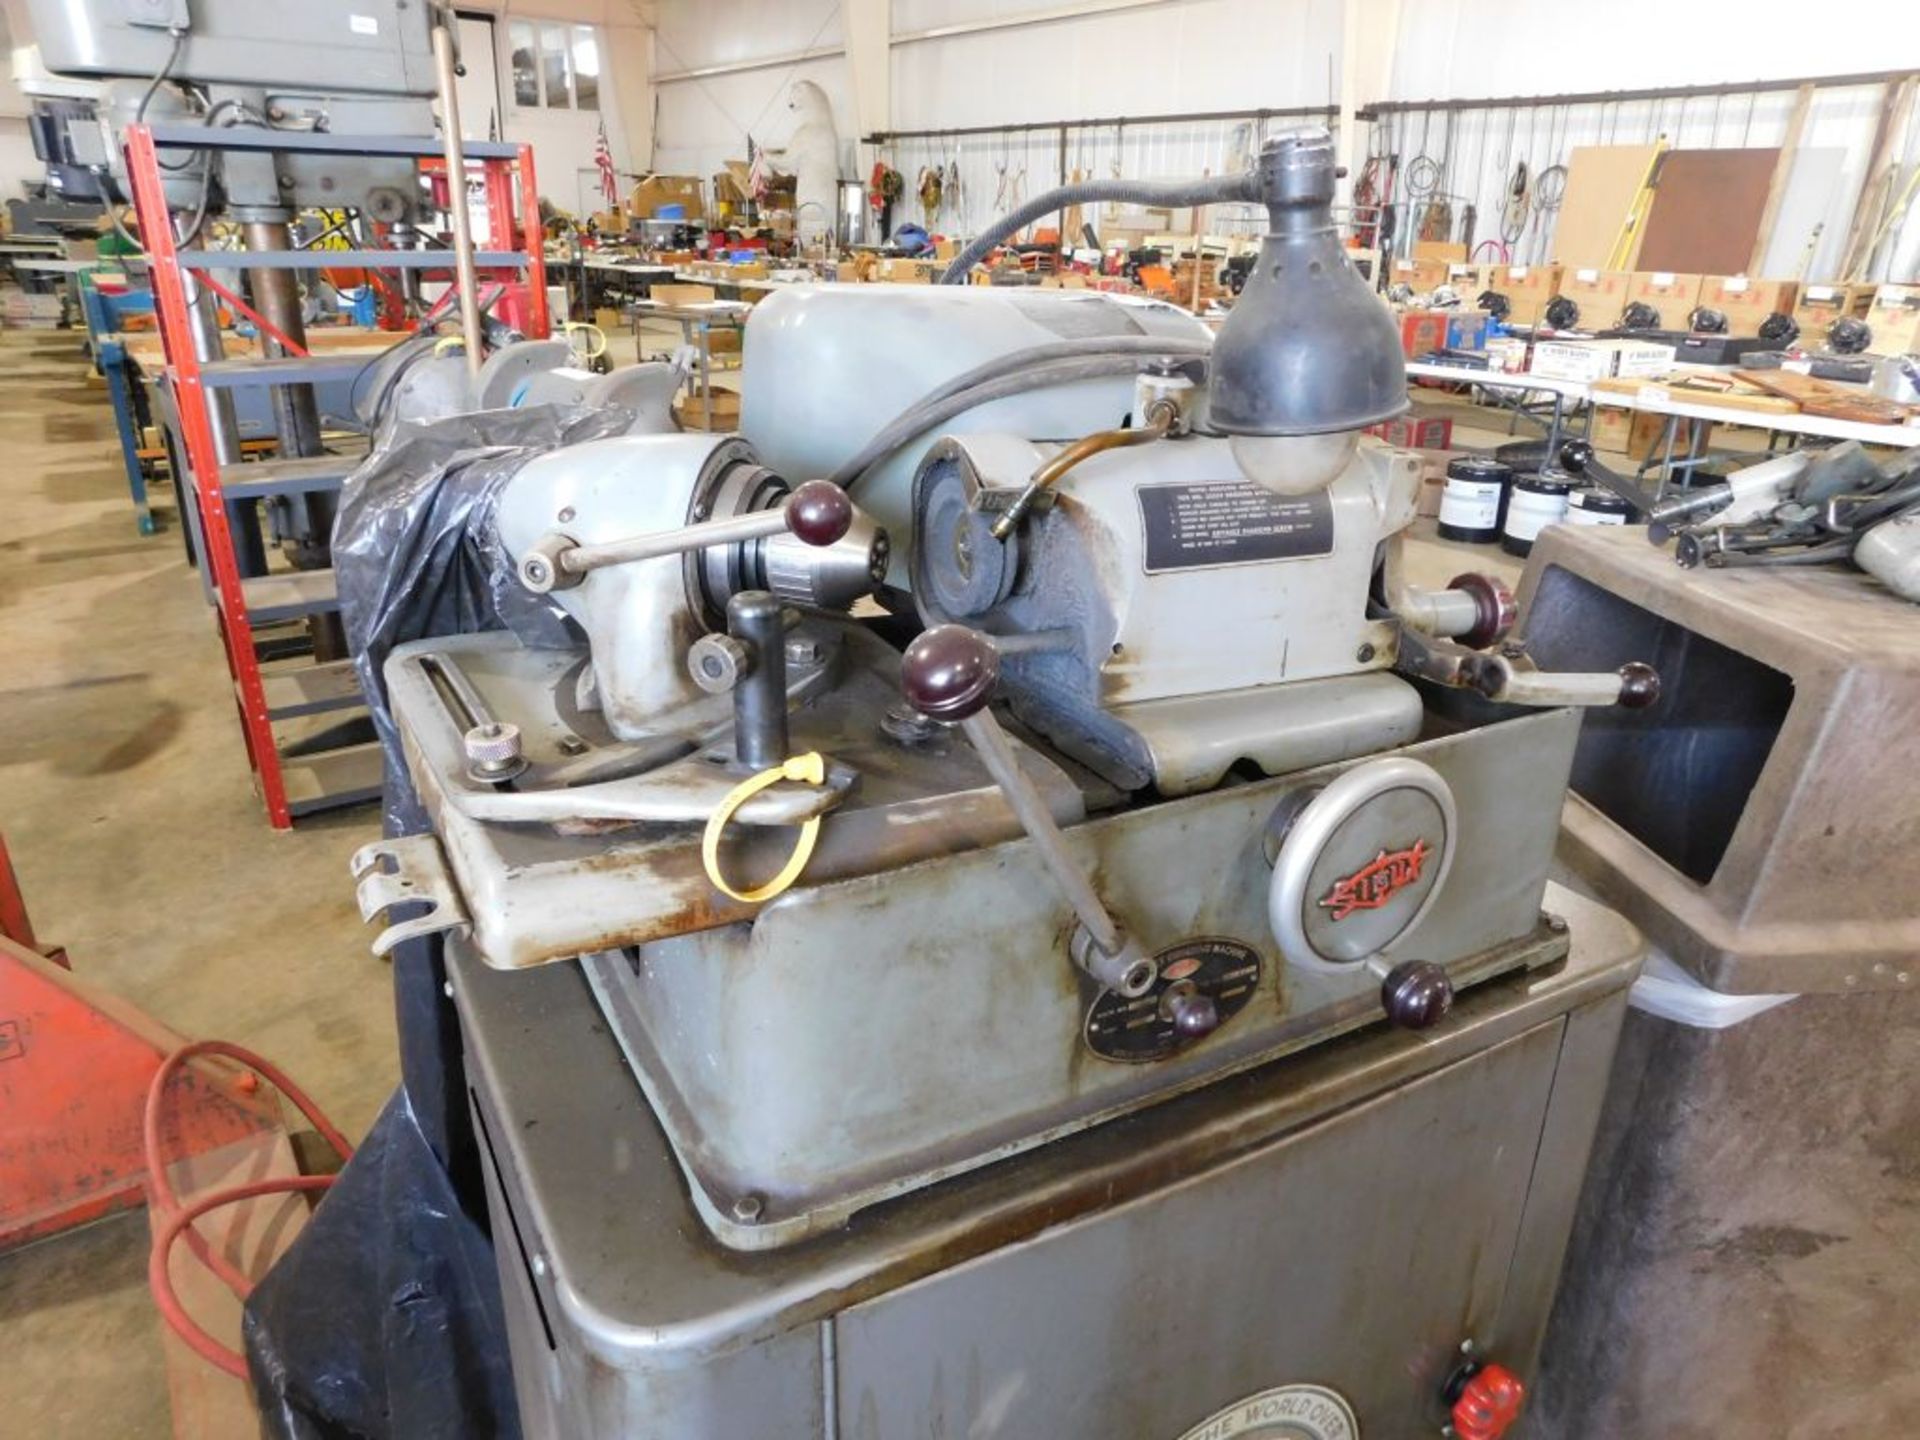 Sioux valve face grinding machine, model 645L, sn 62317, 115 volt. - Image 4 of 6